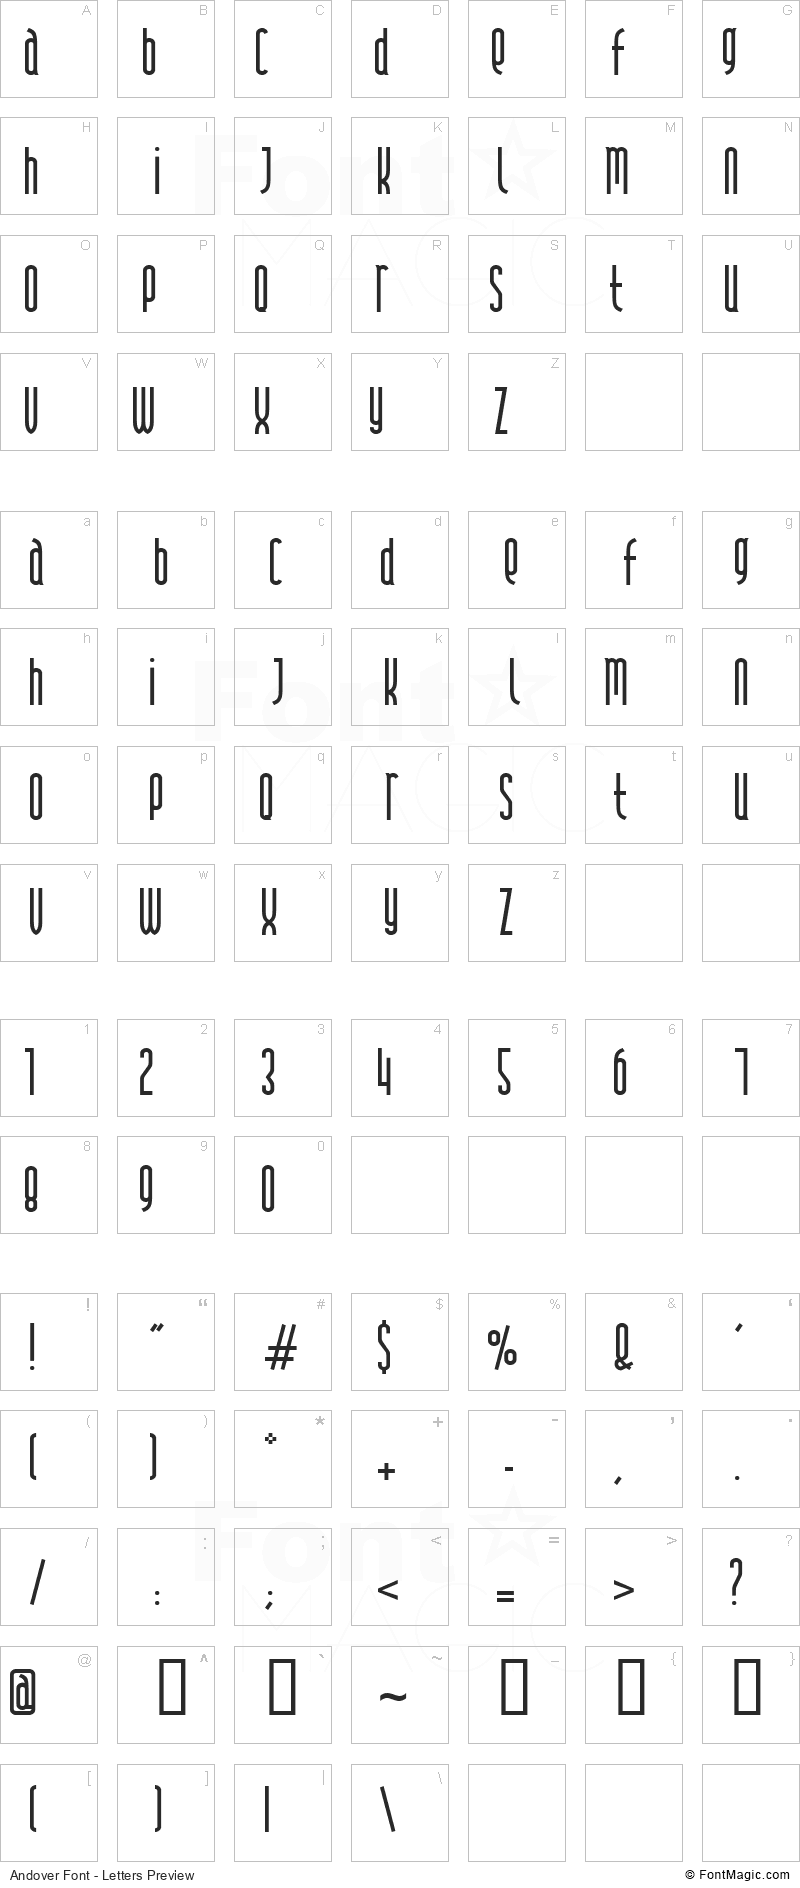 Andover Font - All Latters Preview Chart